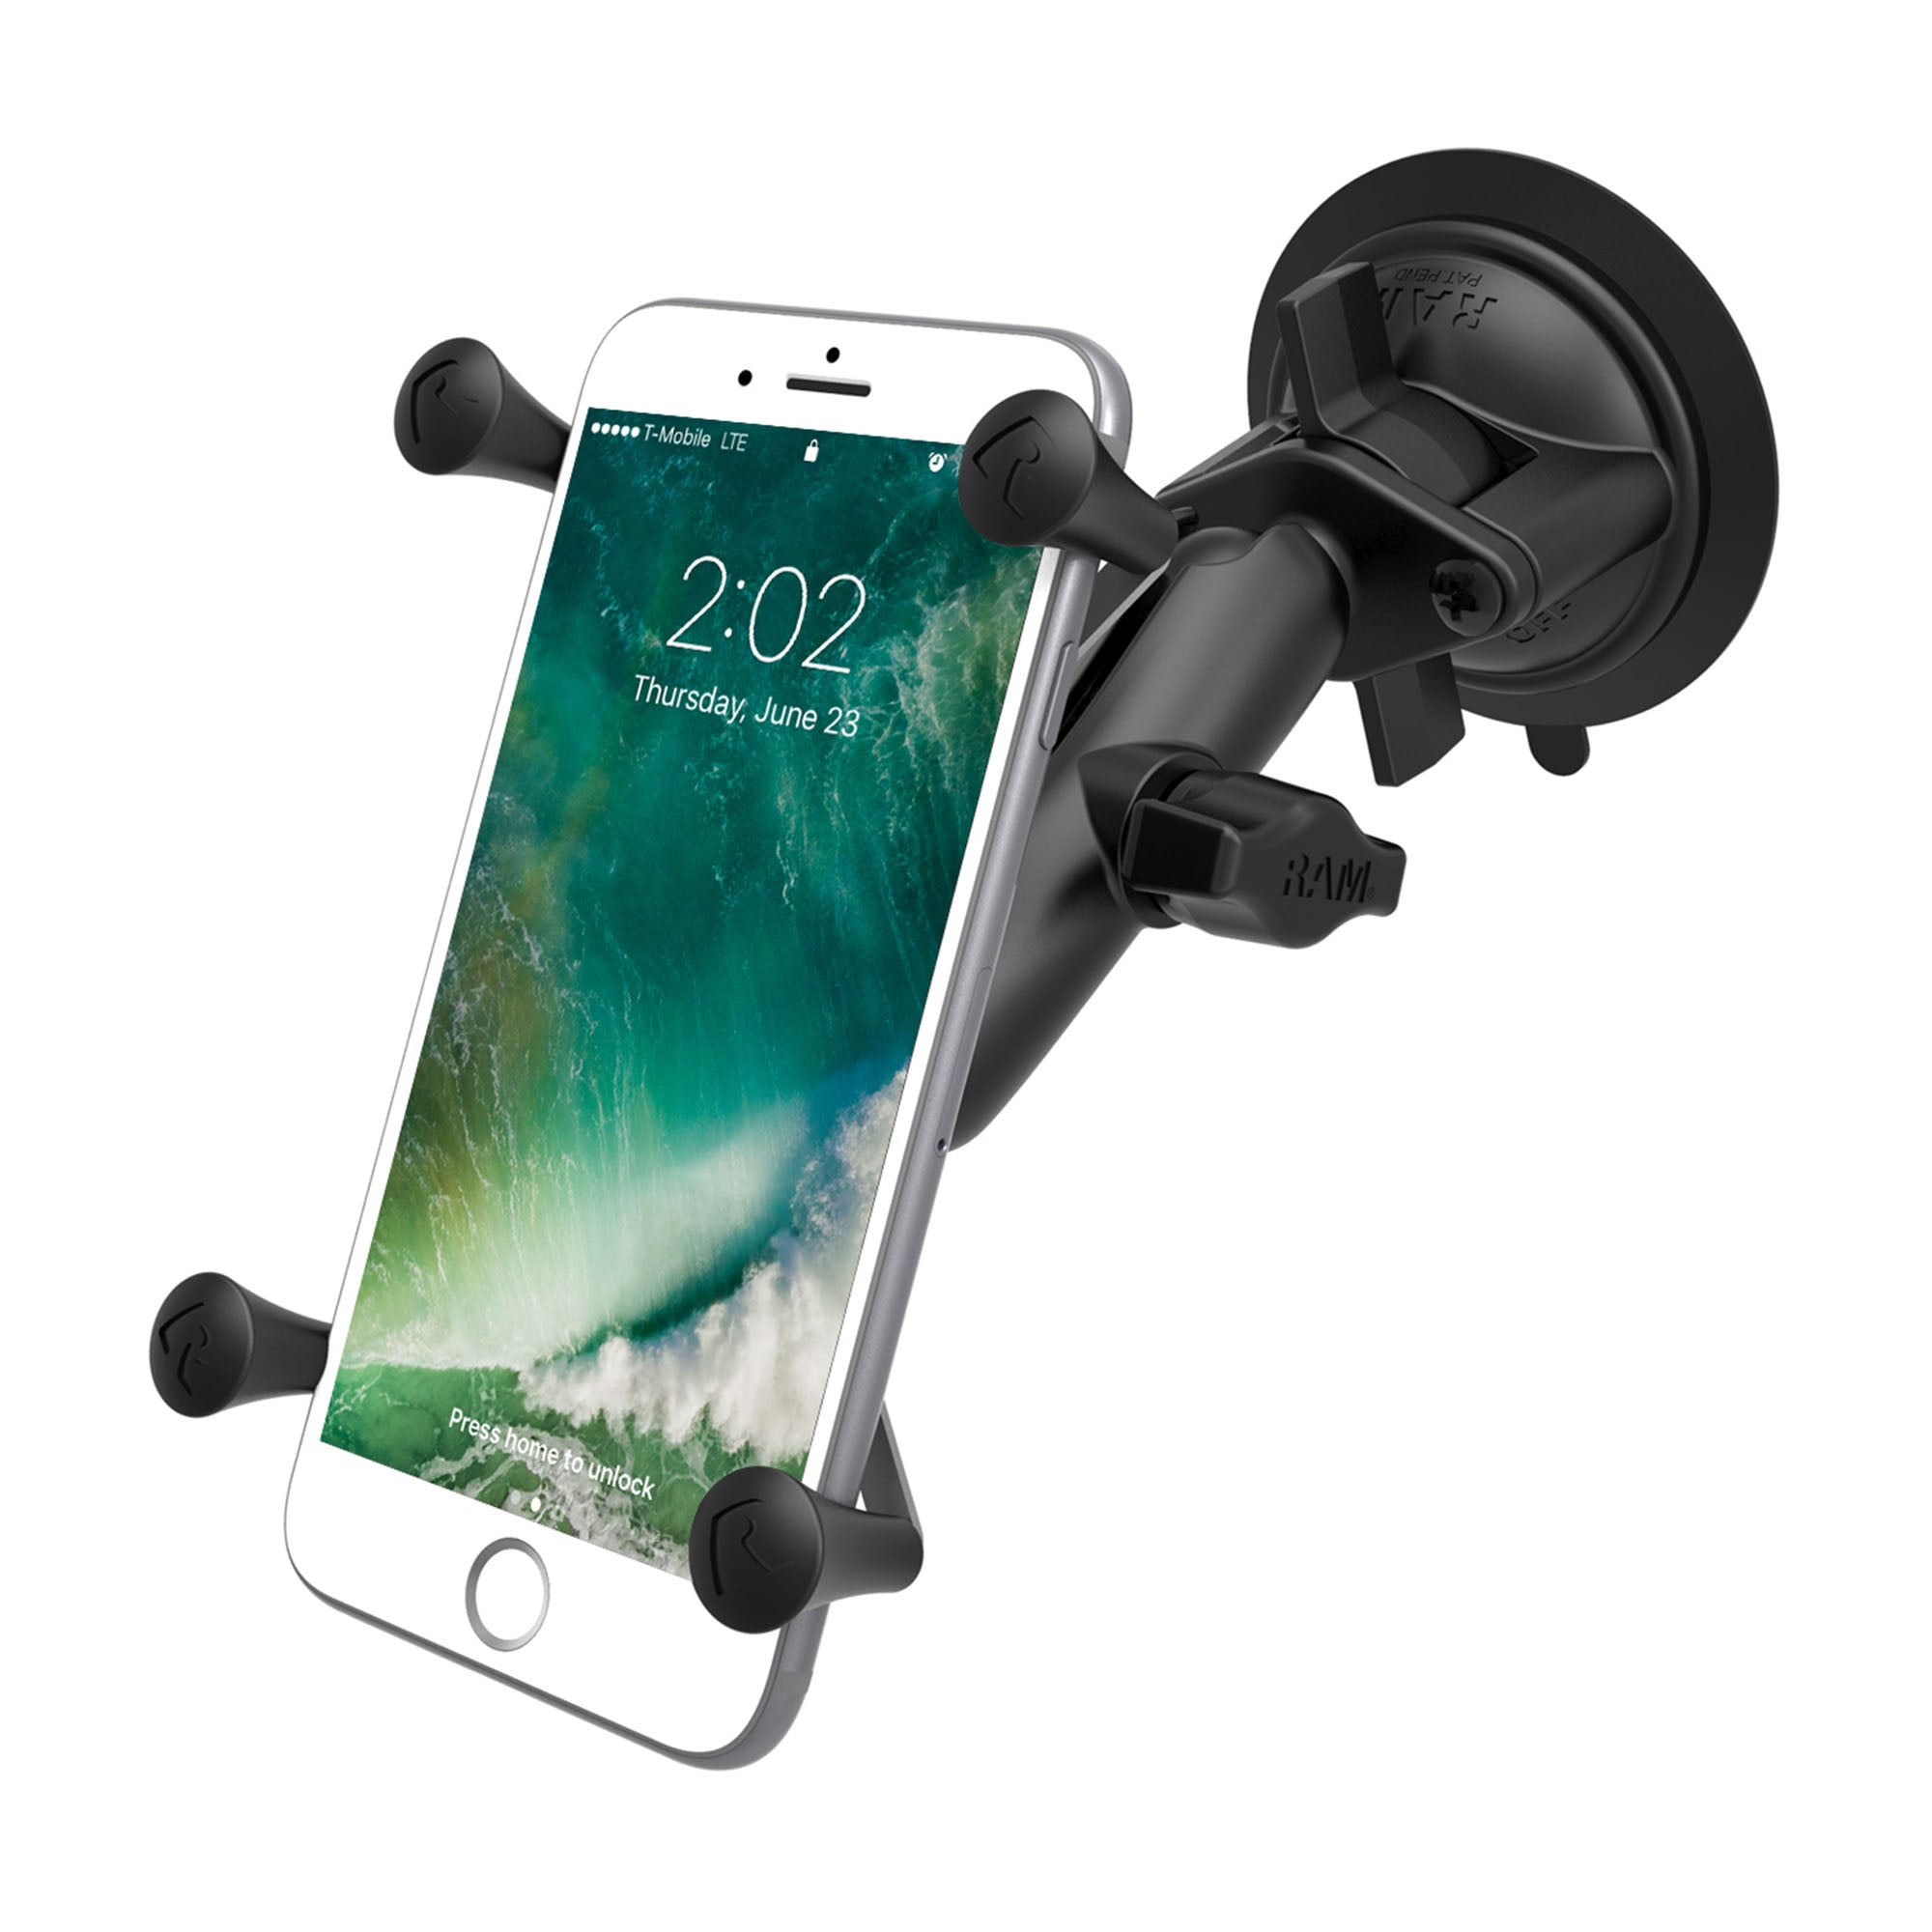 RAM Black Large X-Grip with Twist Lock Suction Cup Base Rugged Vehicle Mount